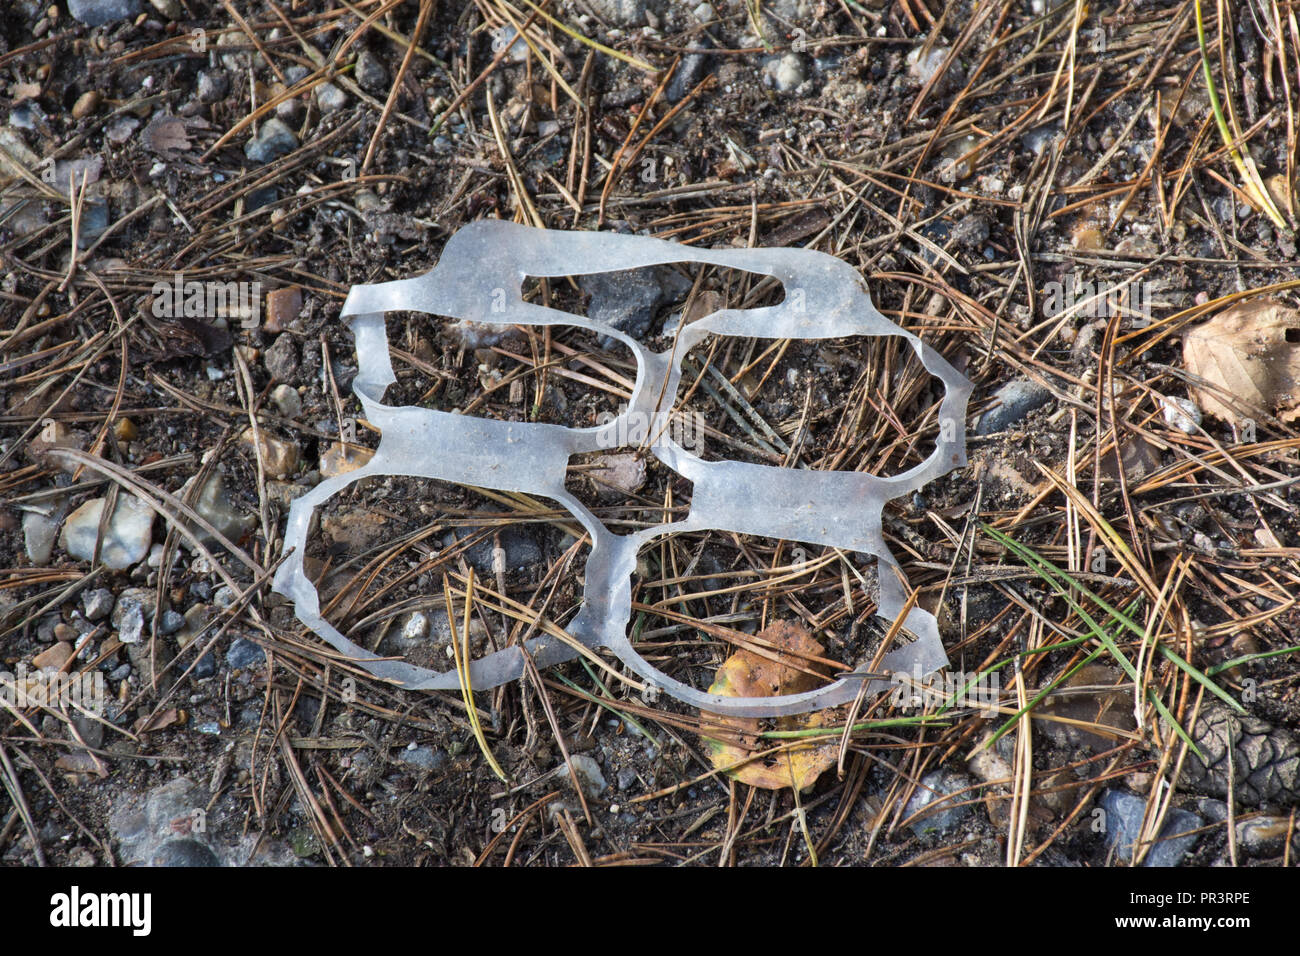 Litter plastic waste discarded in the countryside, plastic rings for holding cans together, dangerous to wildlife Stock Photo